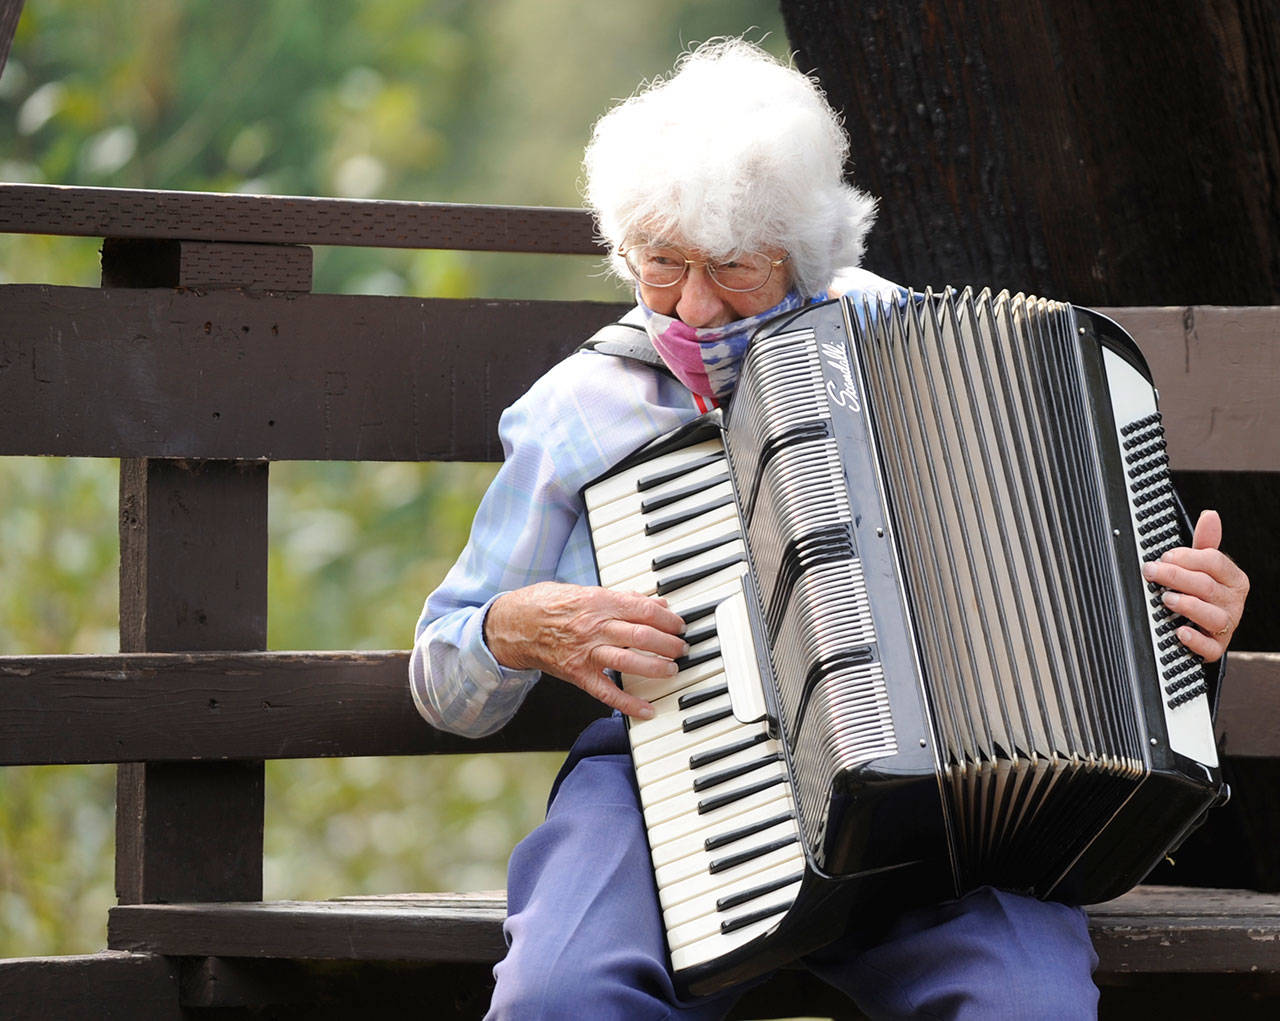 Helen Bucher, a lifelong Sequim resident and former Irrigation Festival Grand Pioneer (2015), celebrates her 90th birthday with some accordion playing at the Railroad Bridge Park on Oct. 1. Sequim Gazette photo by Michael Dashiell